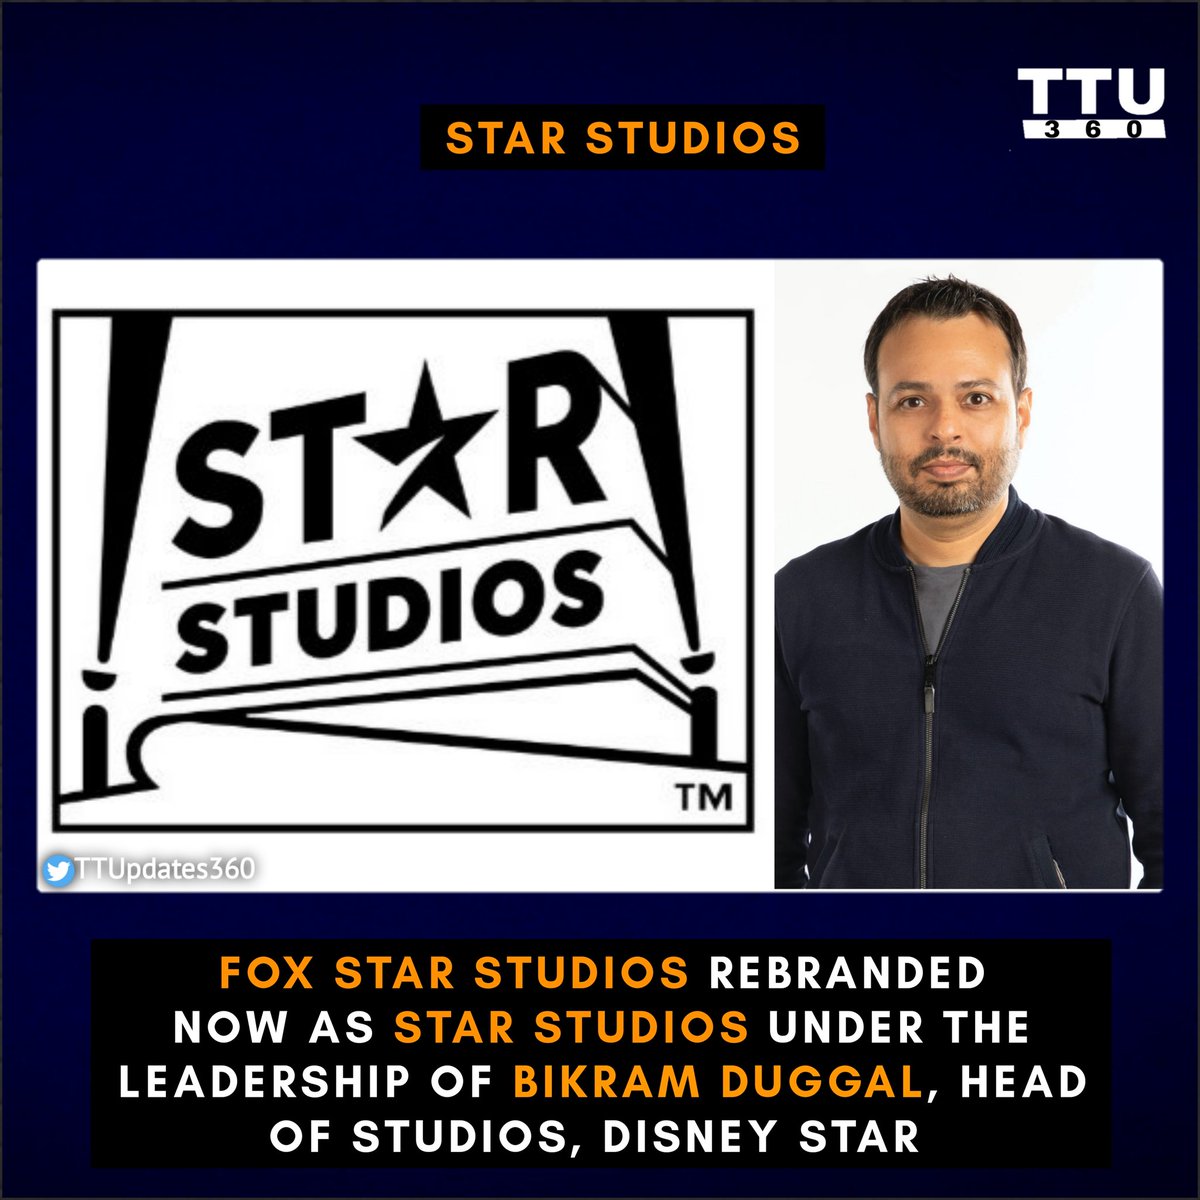 #FoxStar Studios, one of India’s leading movie studios  today announced it has rebranded to #StarStudios, introducing a new visual identity and vision under the leadership of #BikramDuggal, Head of Studios, #DisneyStar